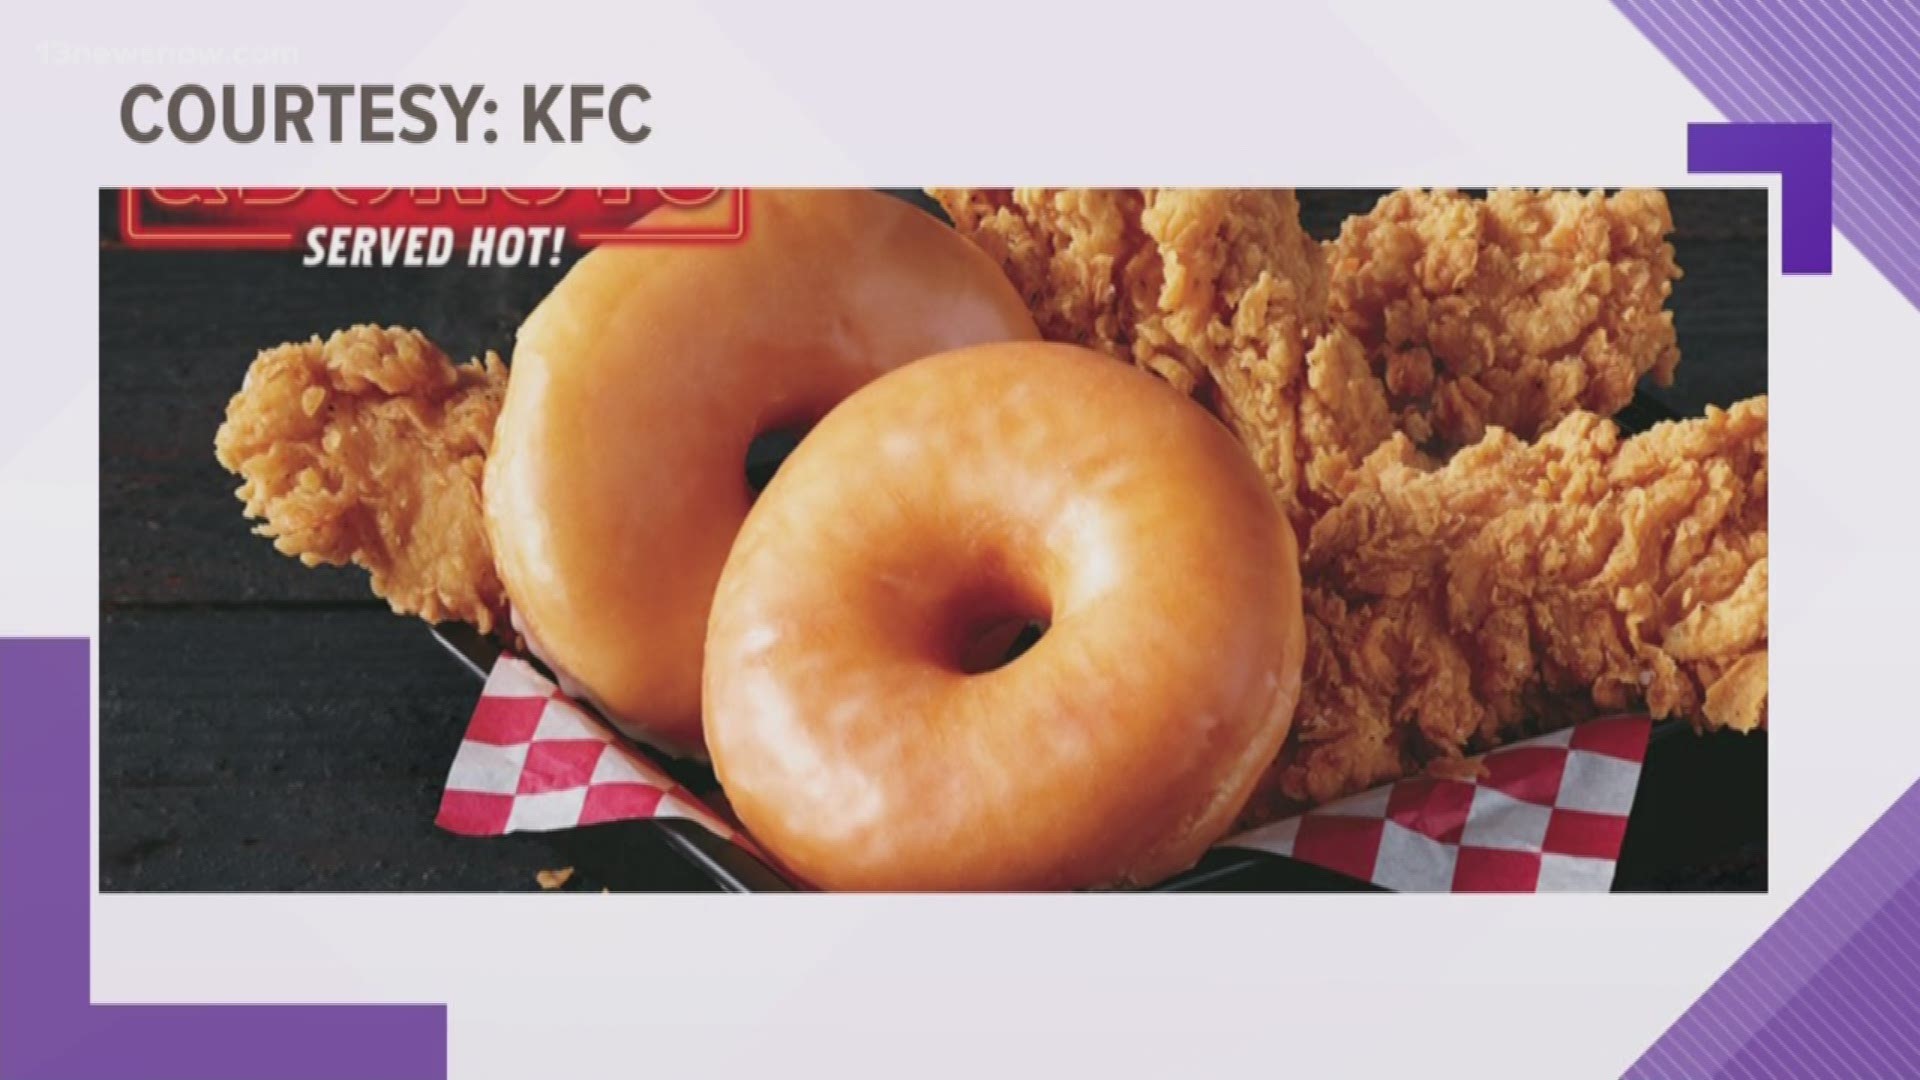 Not only can you get a combo meal with chicken and donuts in a basket, but you can also get a chicken patty sandwiched between two glazed donuts. They are testing at certain locations in the Hampton Roads area.